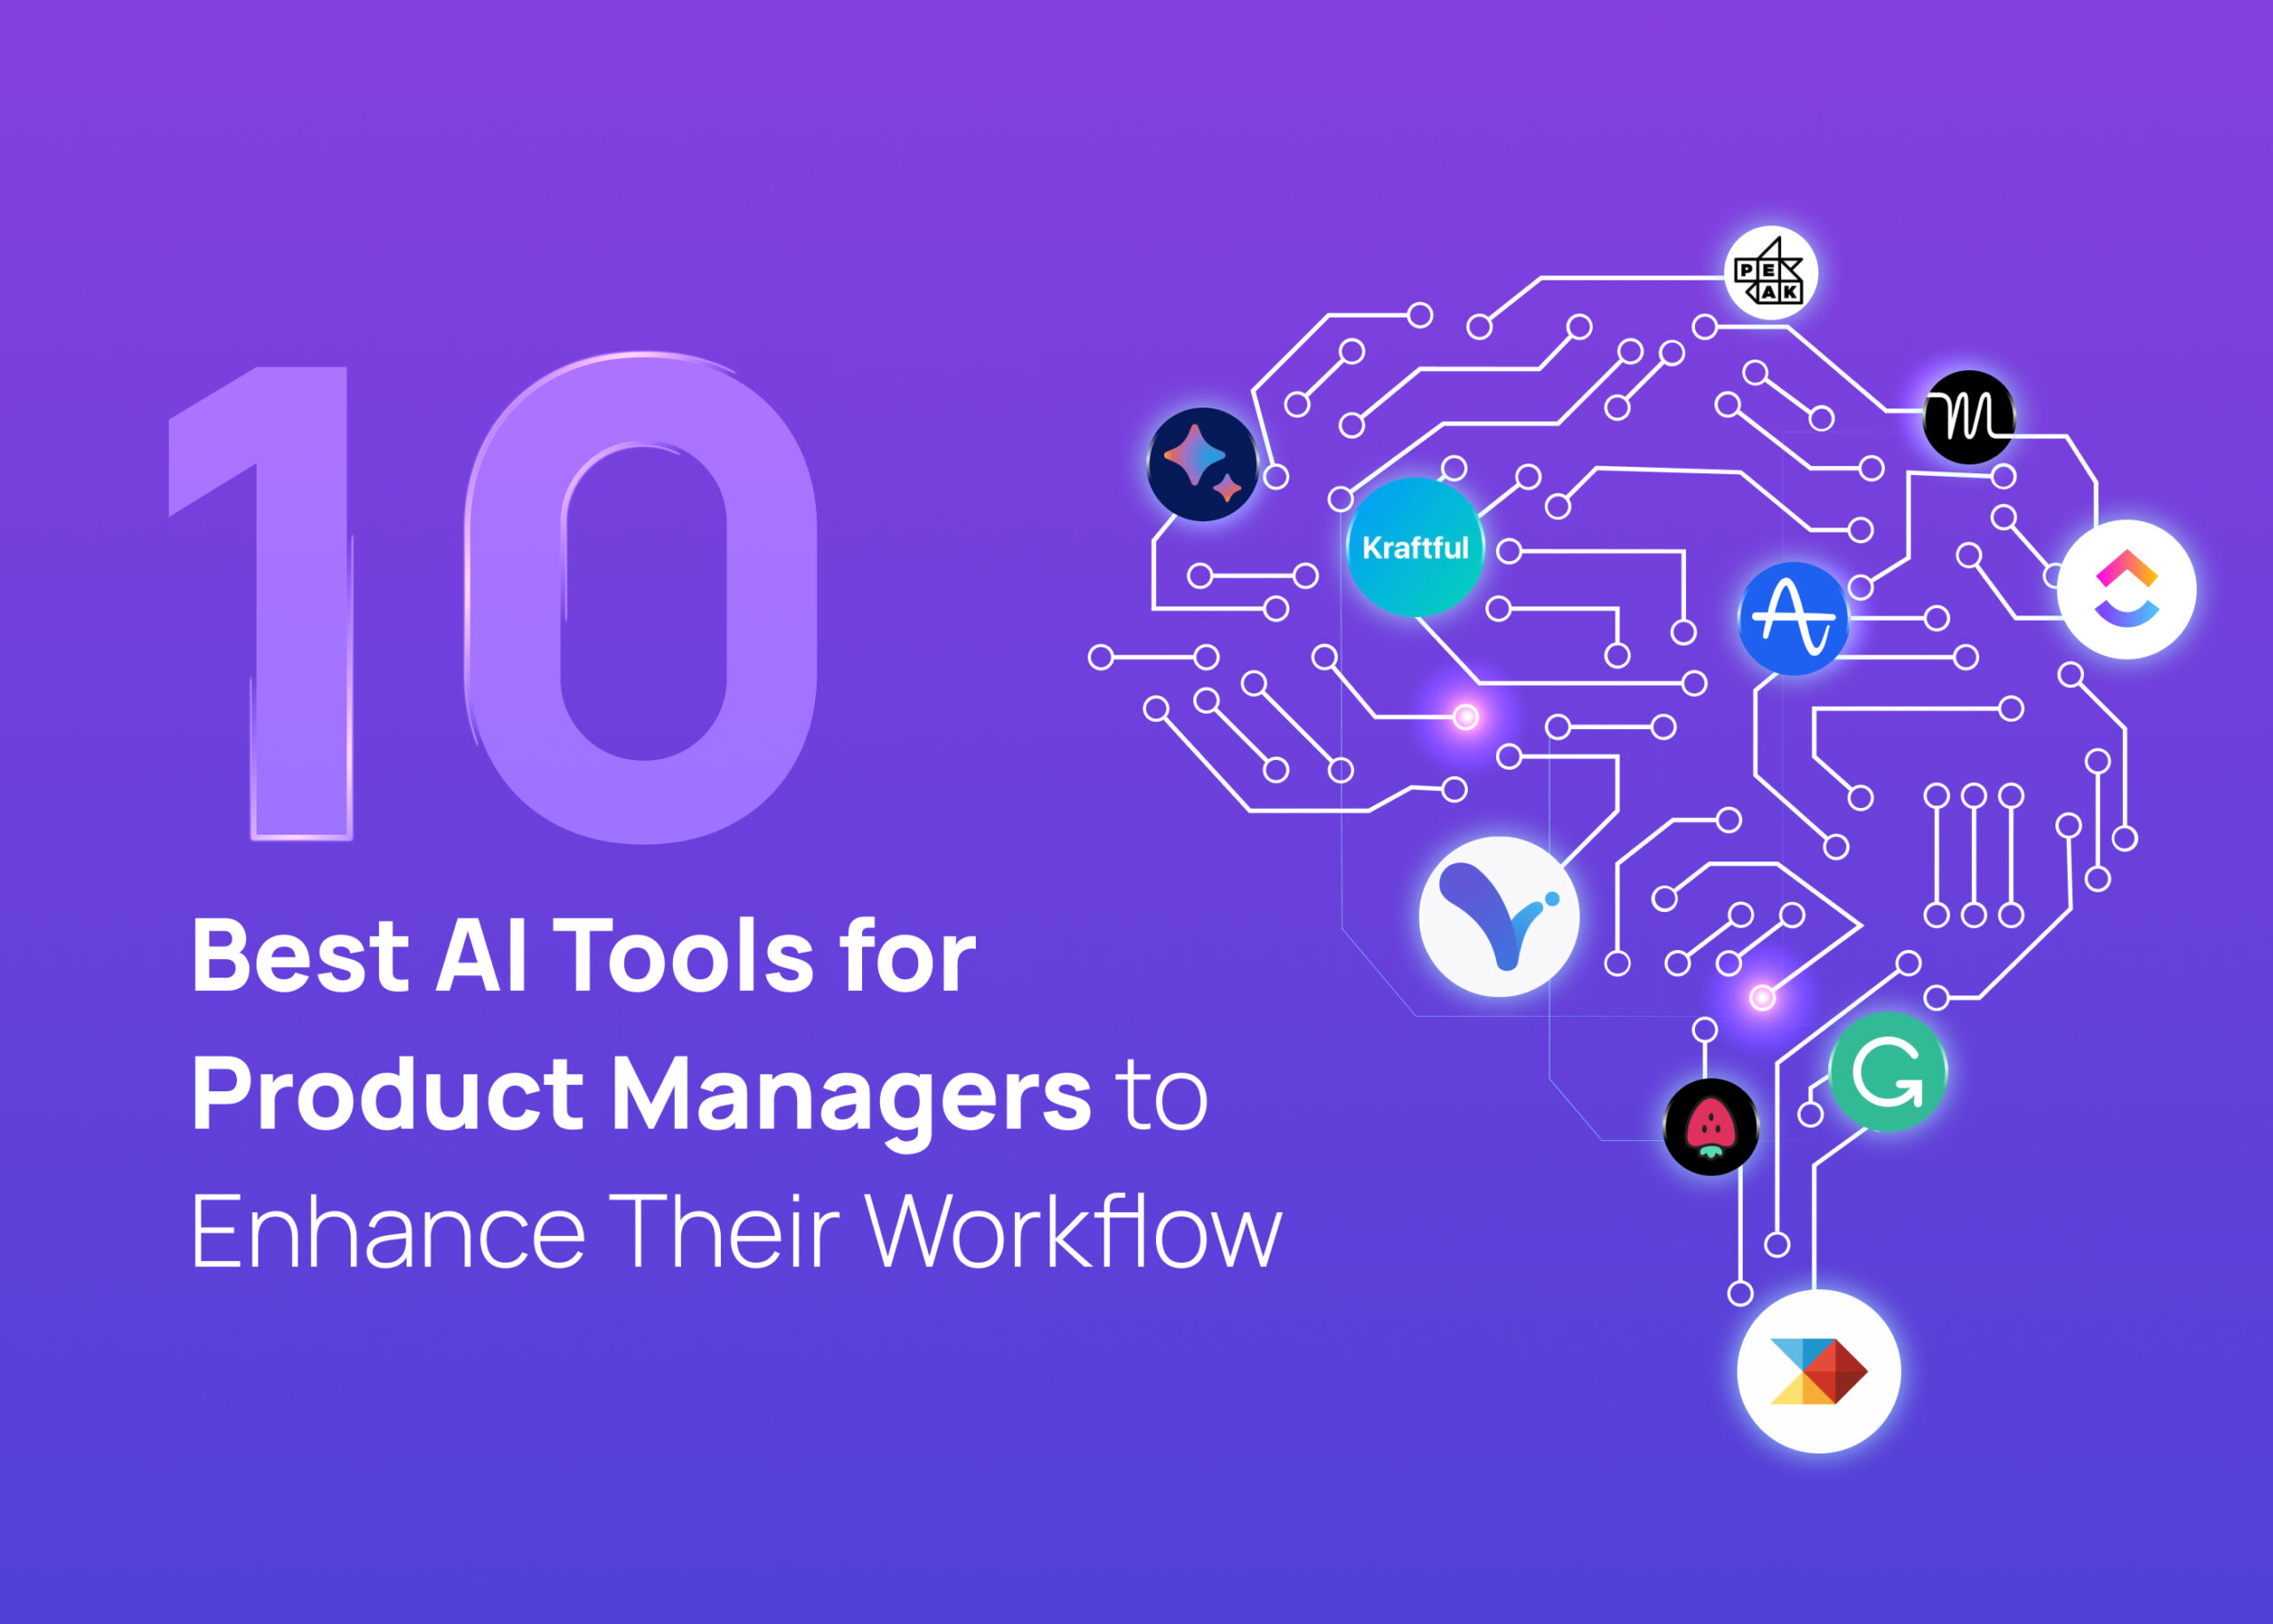 10 Best AI Tools for Product Managers to Enhance Their Workflow - Visily